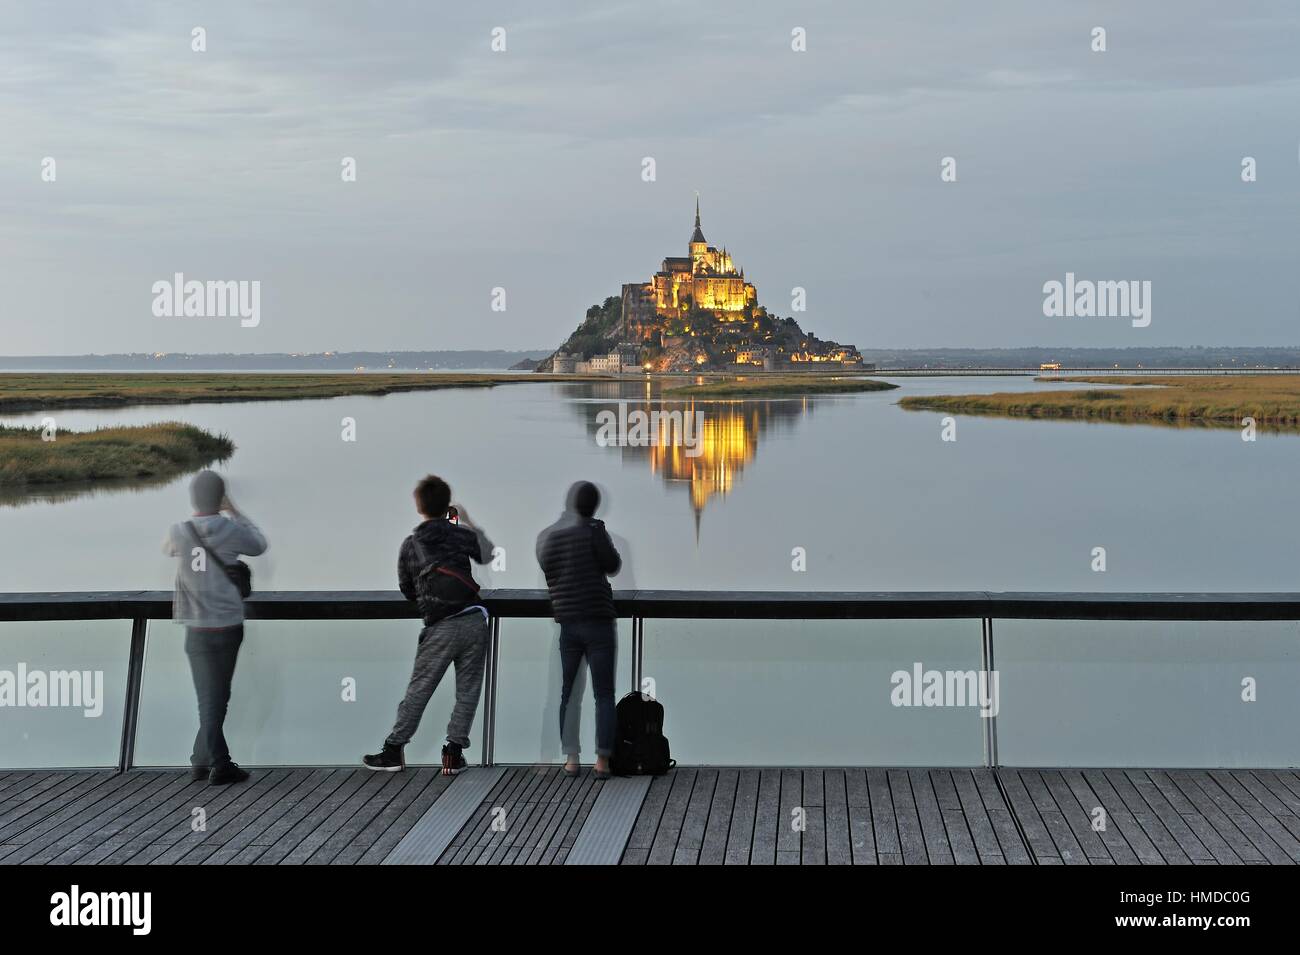 Mont-Saint-Michel in the mouth of the Couesnon river seen from the footbridge on the dam, Manche department, Normandy region, France, Europe. Stock Photo